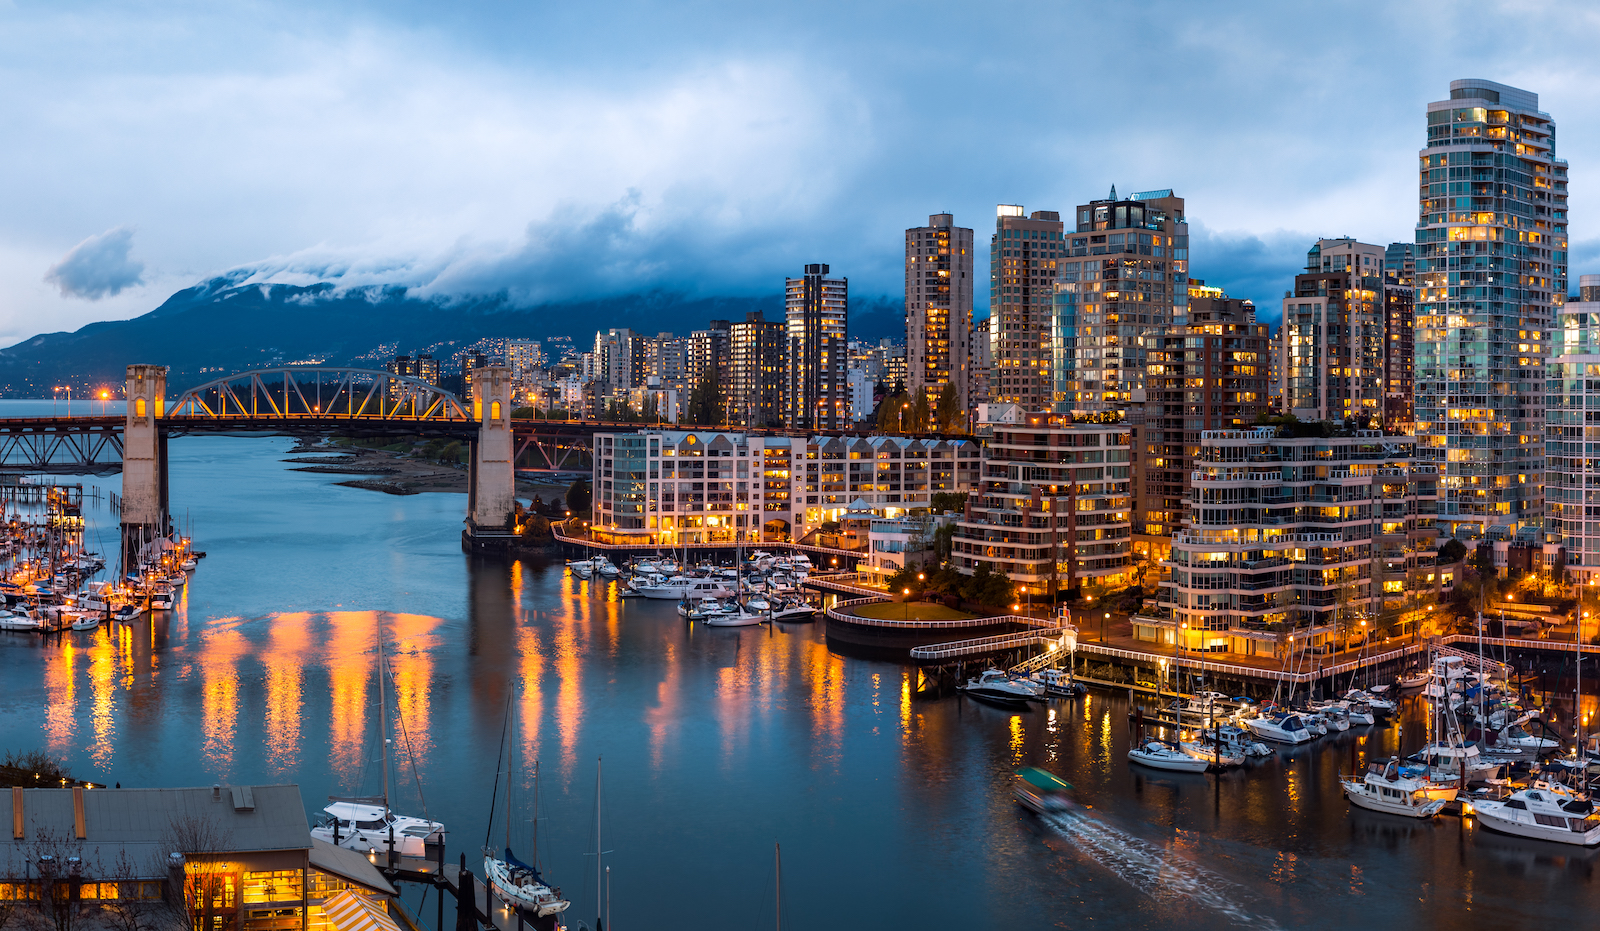 7. Vancouver, BC